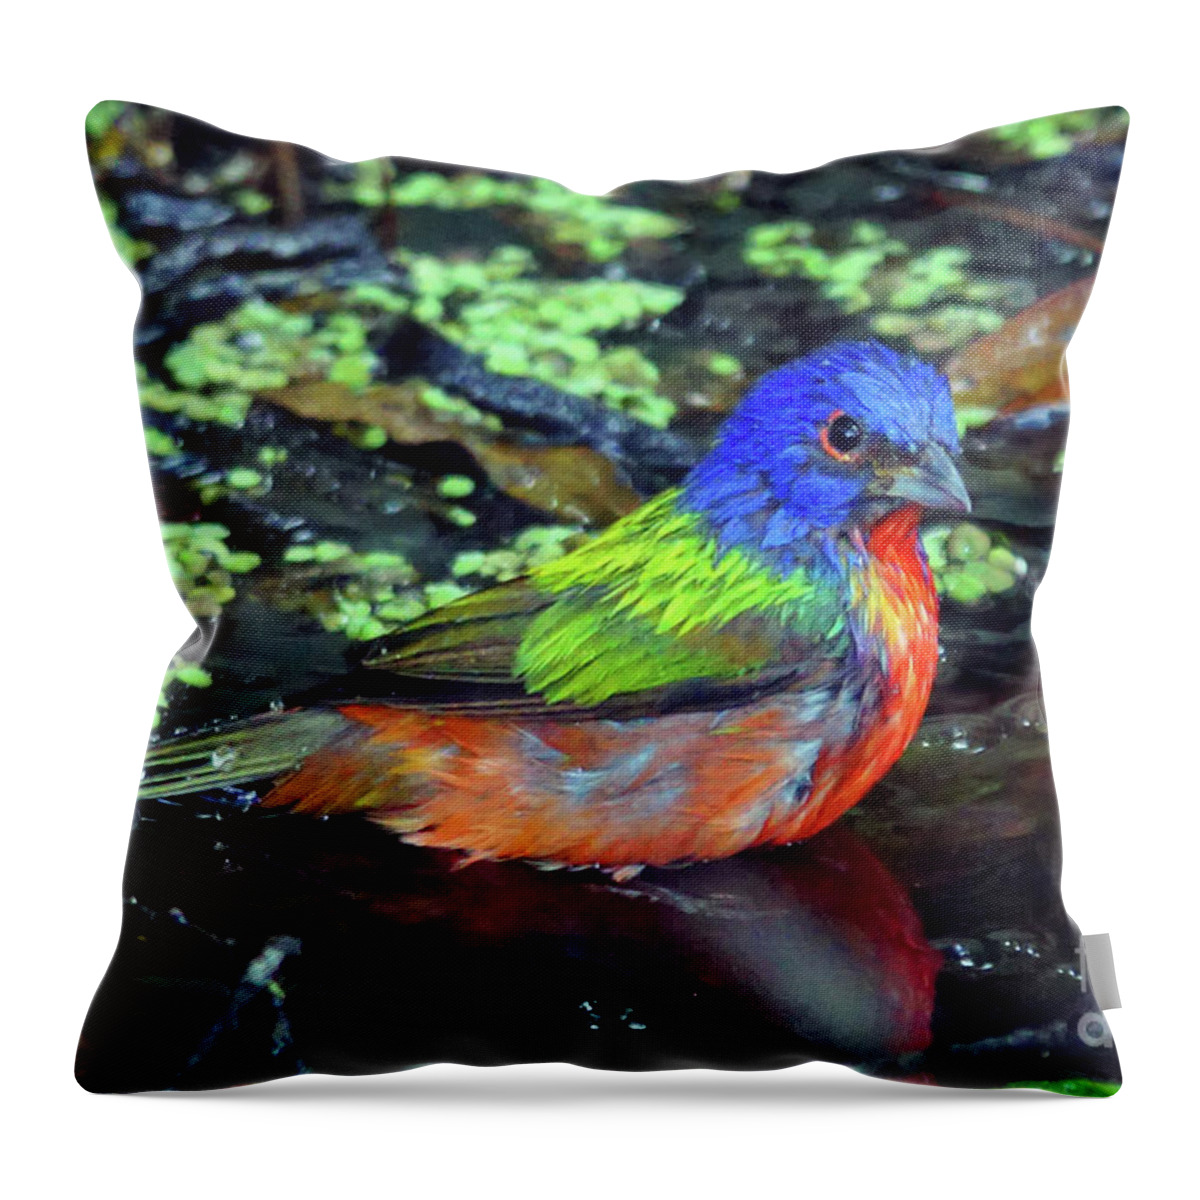 Bunting Throw Pillow featuring the photograph Painted Bunting After Bath by Larry Nieland